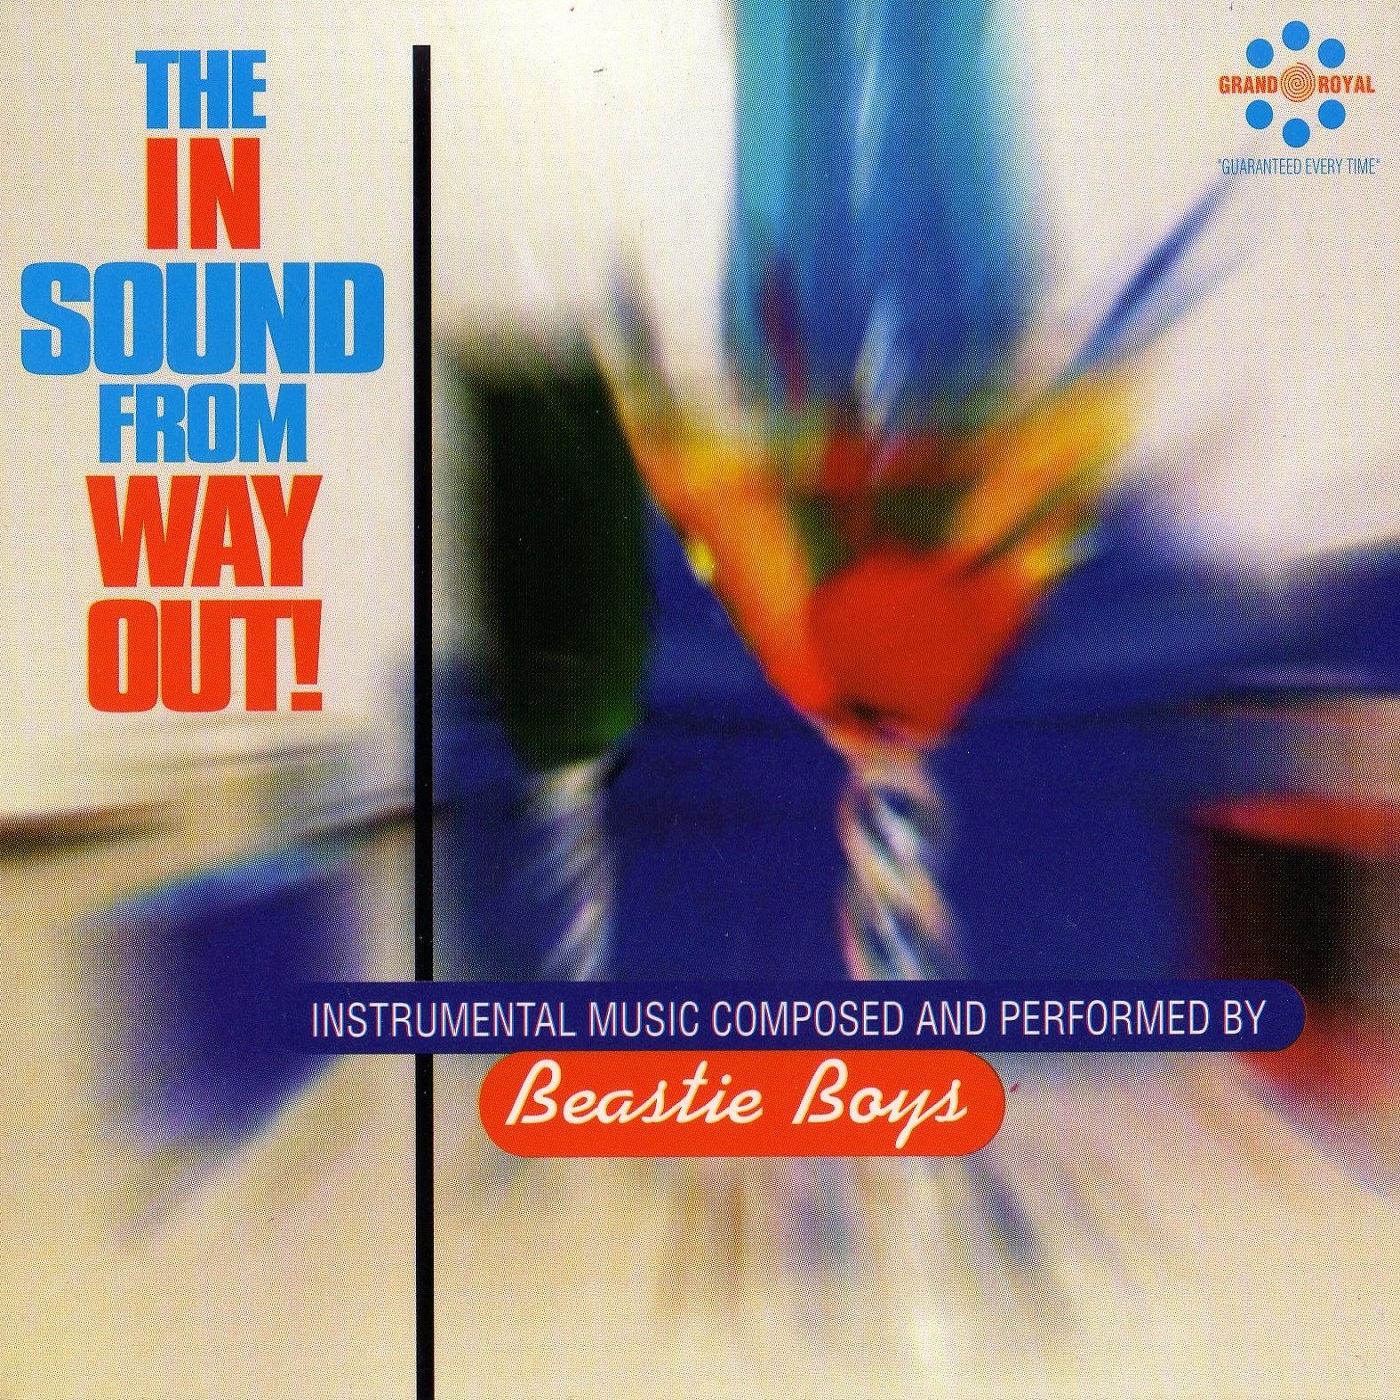 The Beastie Boys’ “The In Sound From Way Out” (with Darren Capulong)